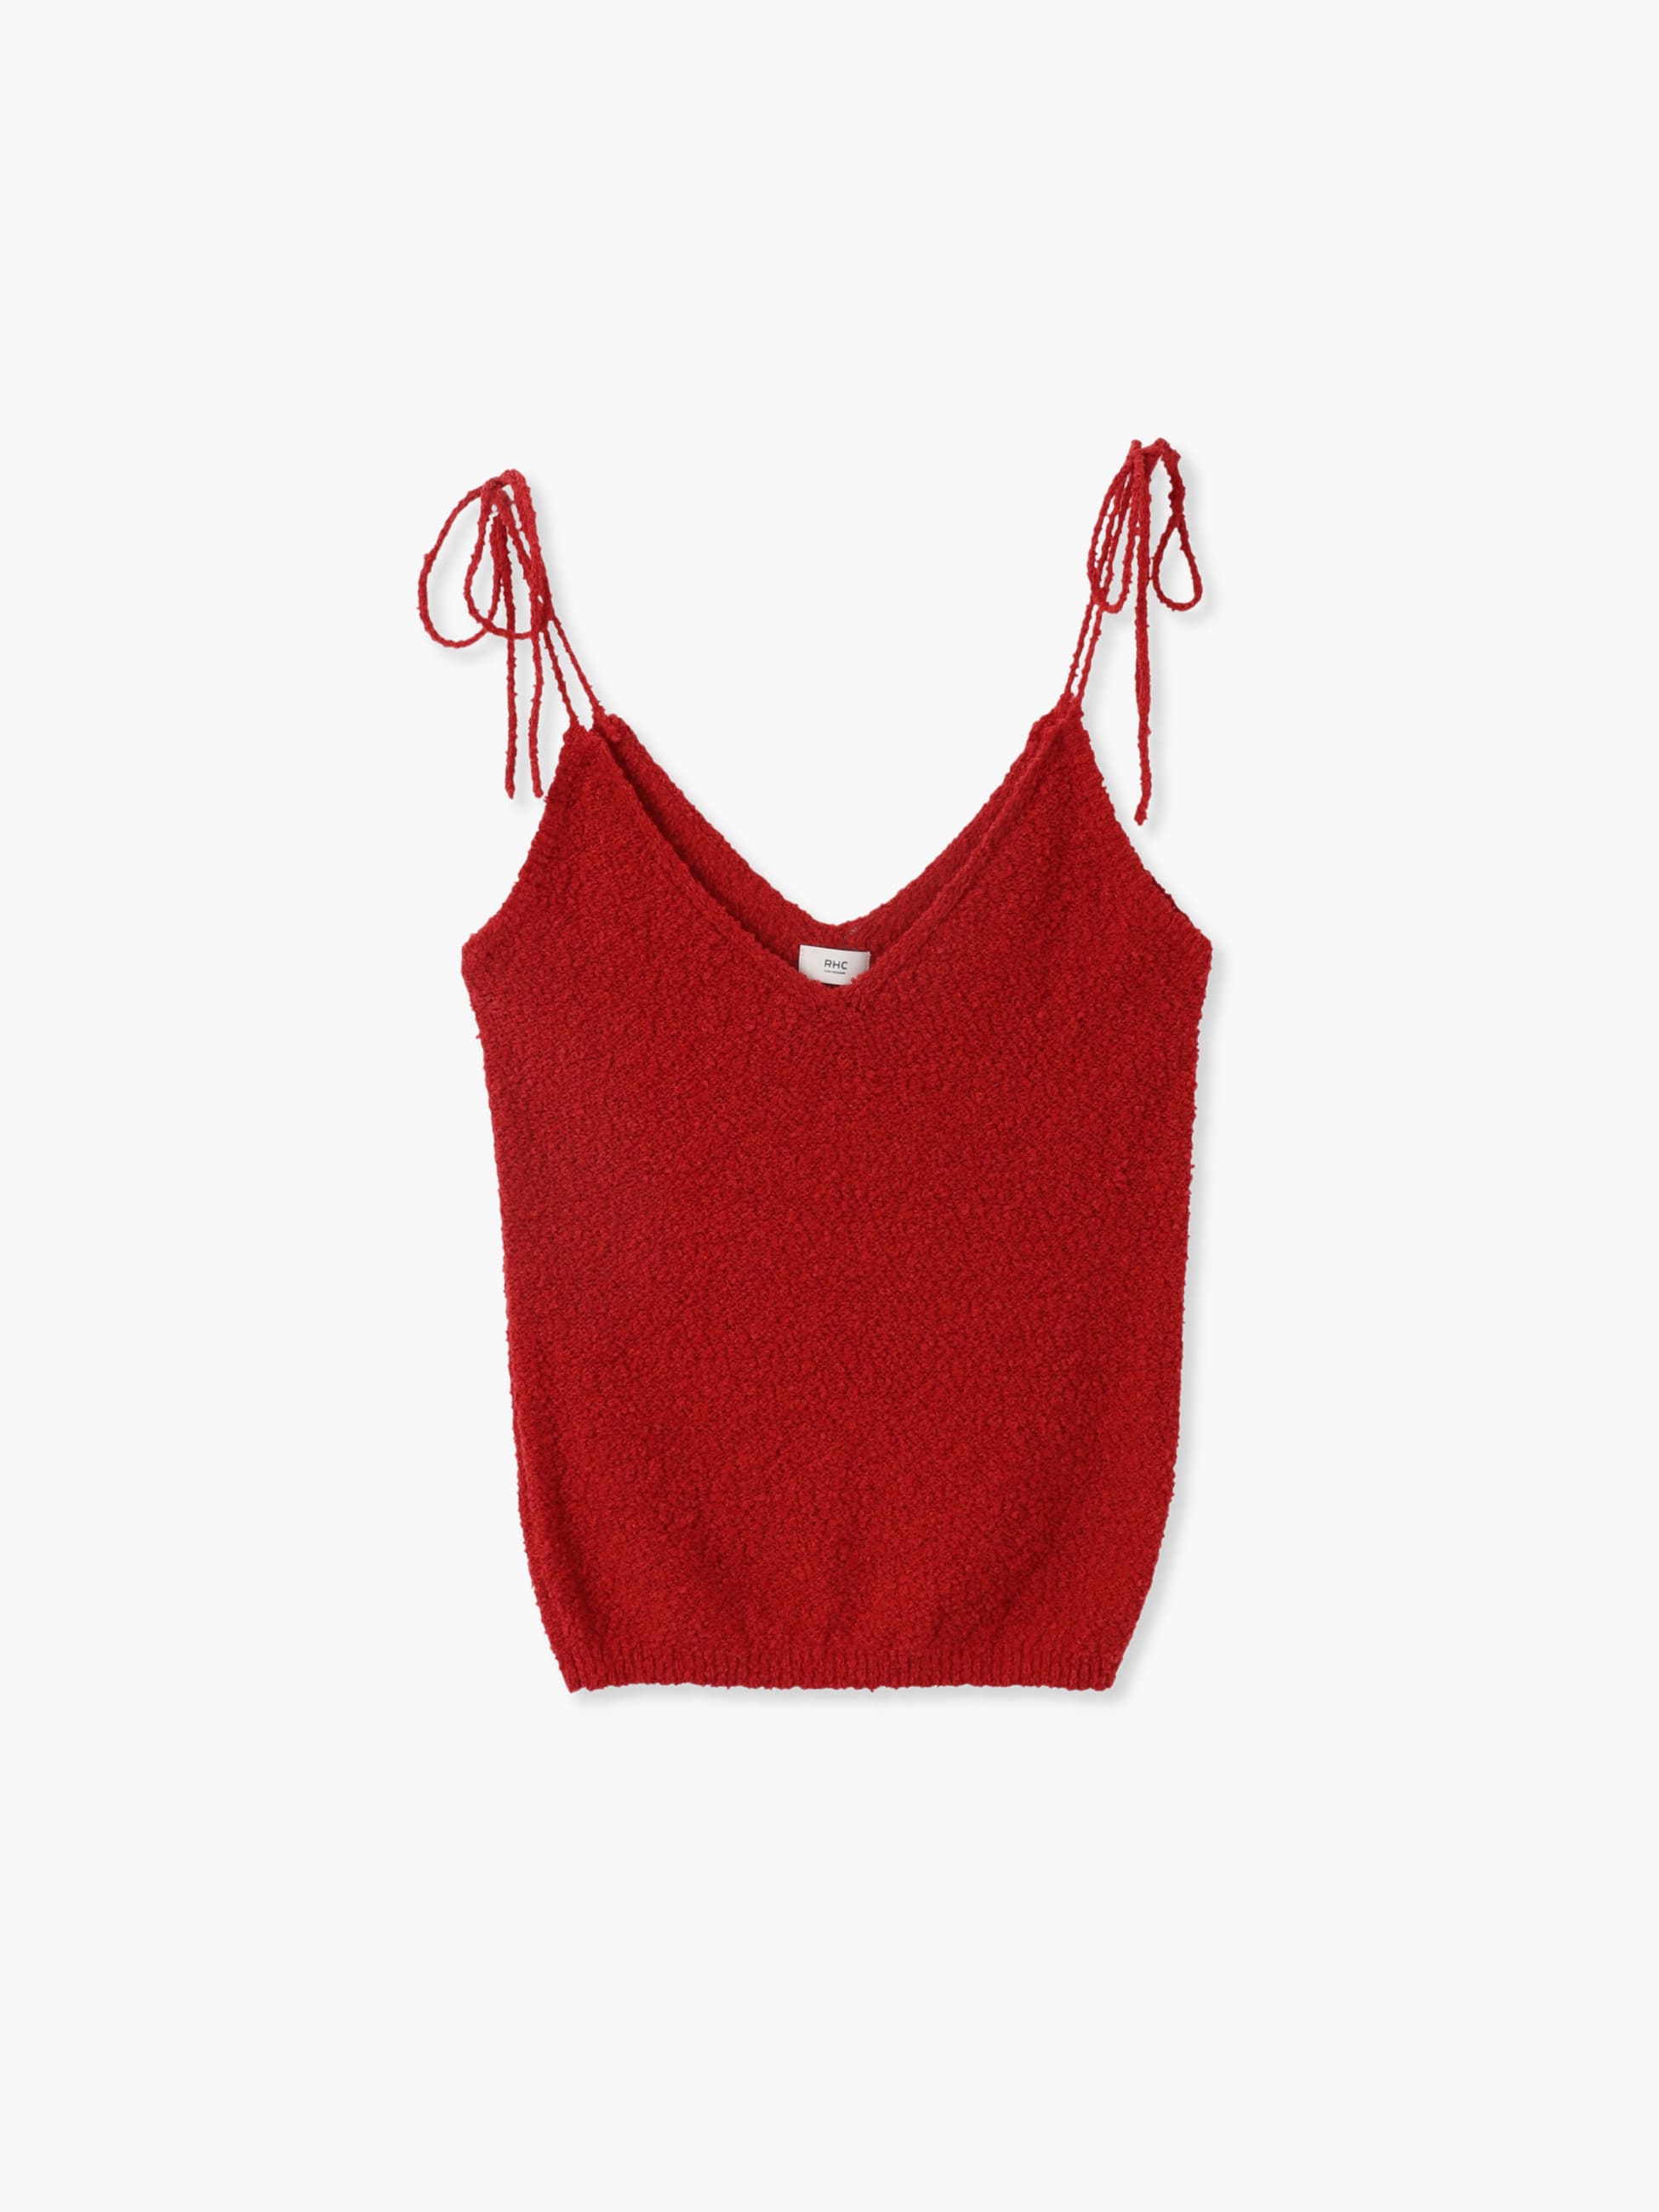 Knit Camisole Top